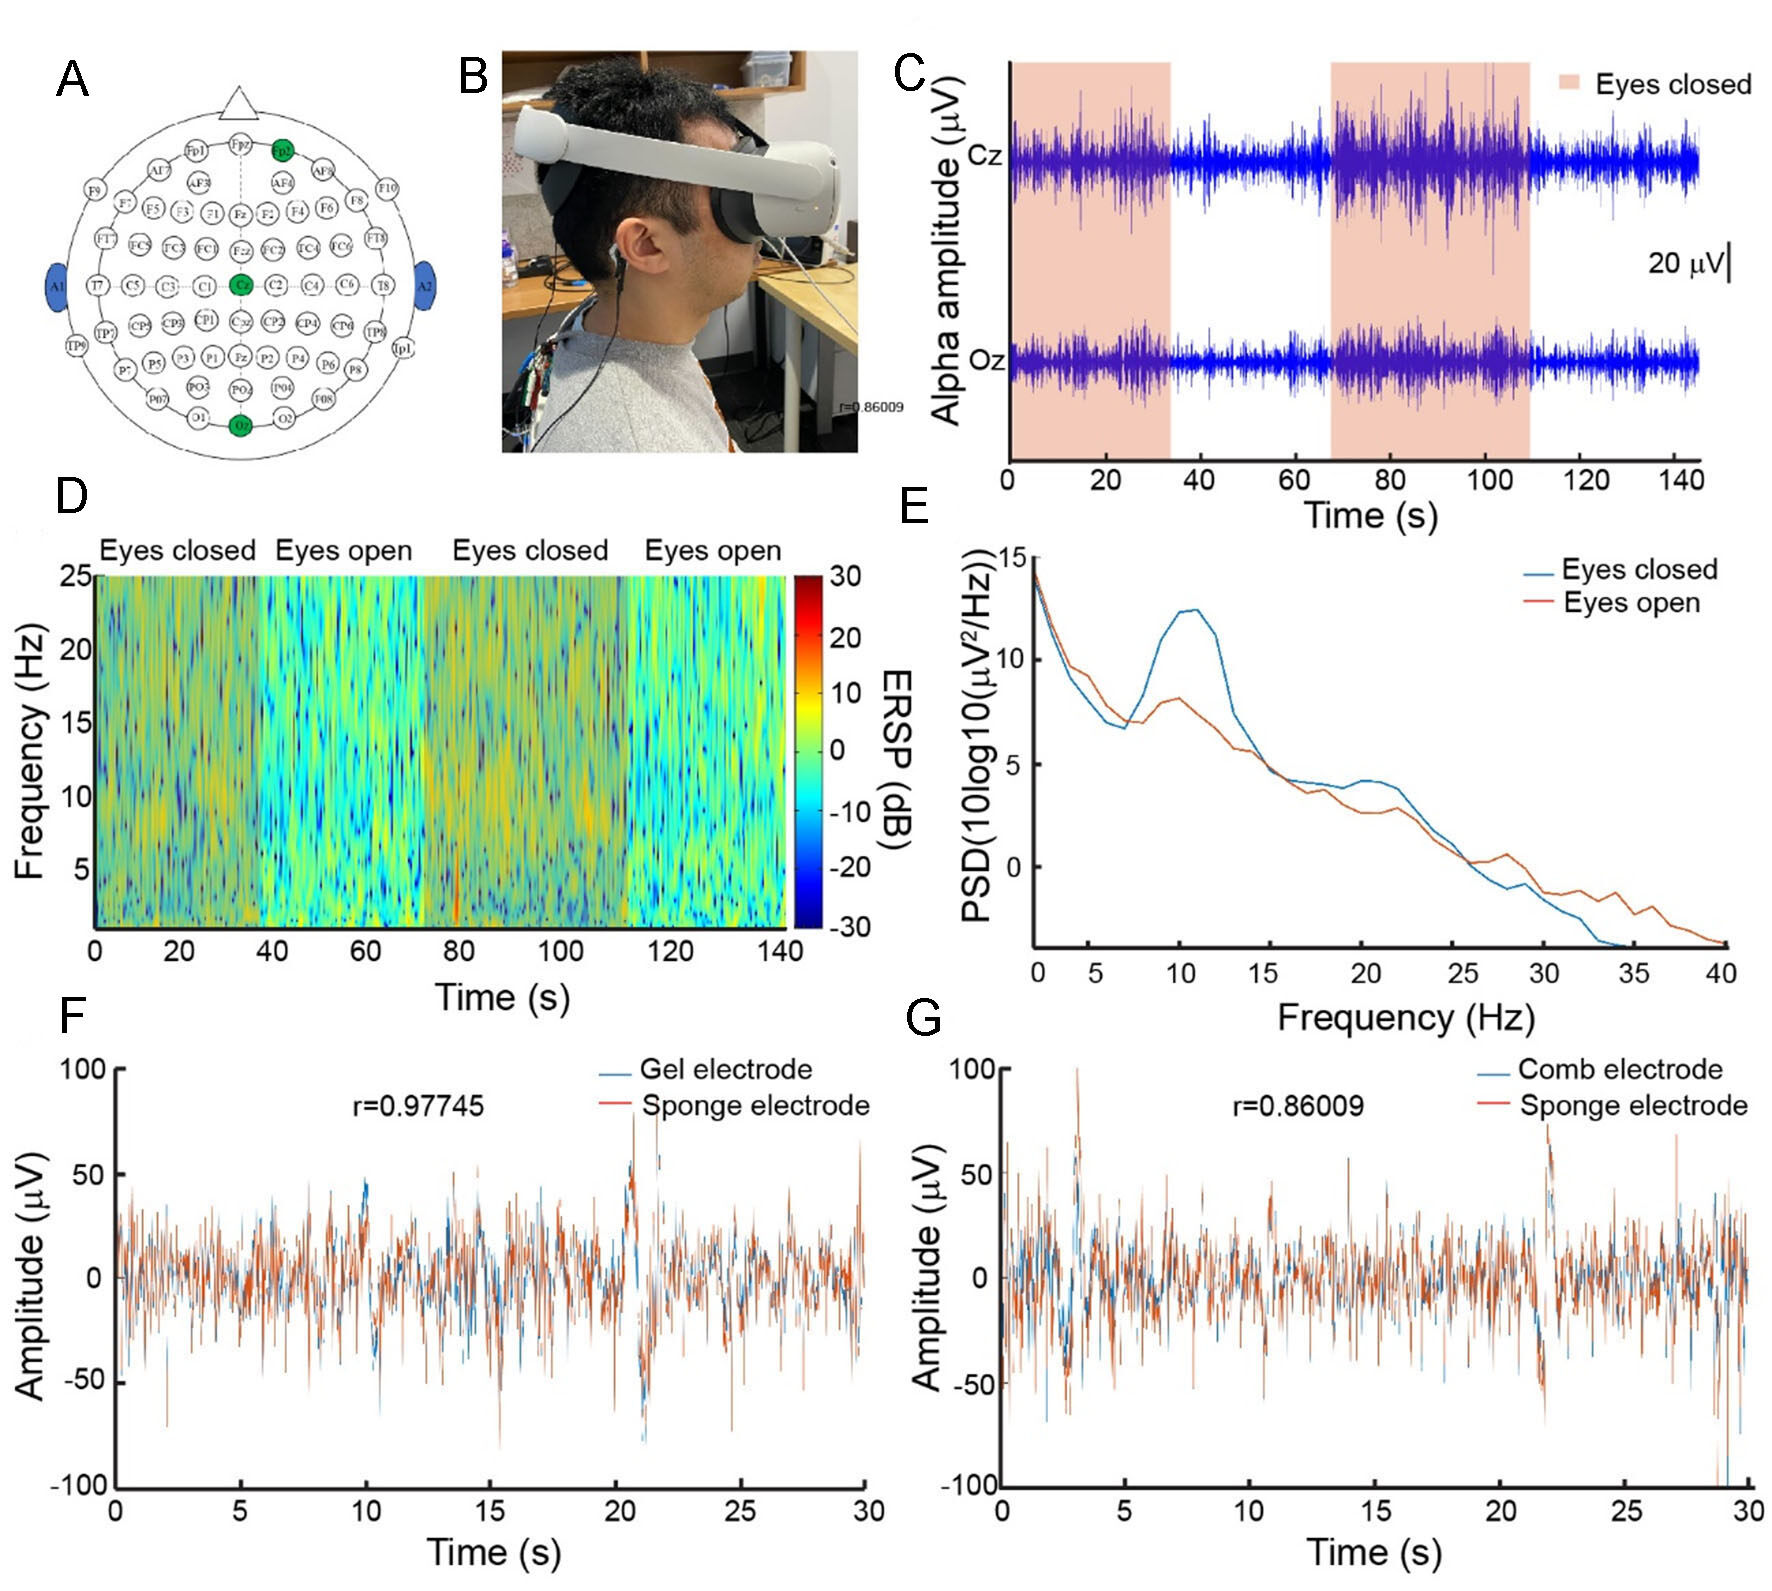 Hair-compatible sponge electrodes integrated on VR headset for electroencephalography